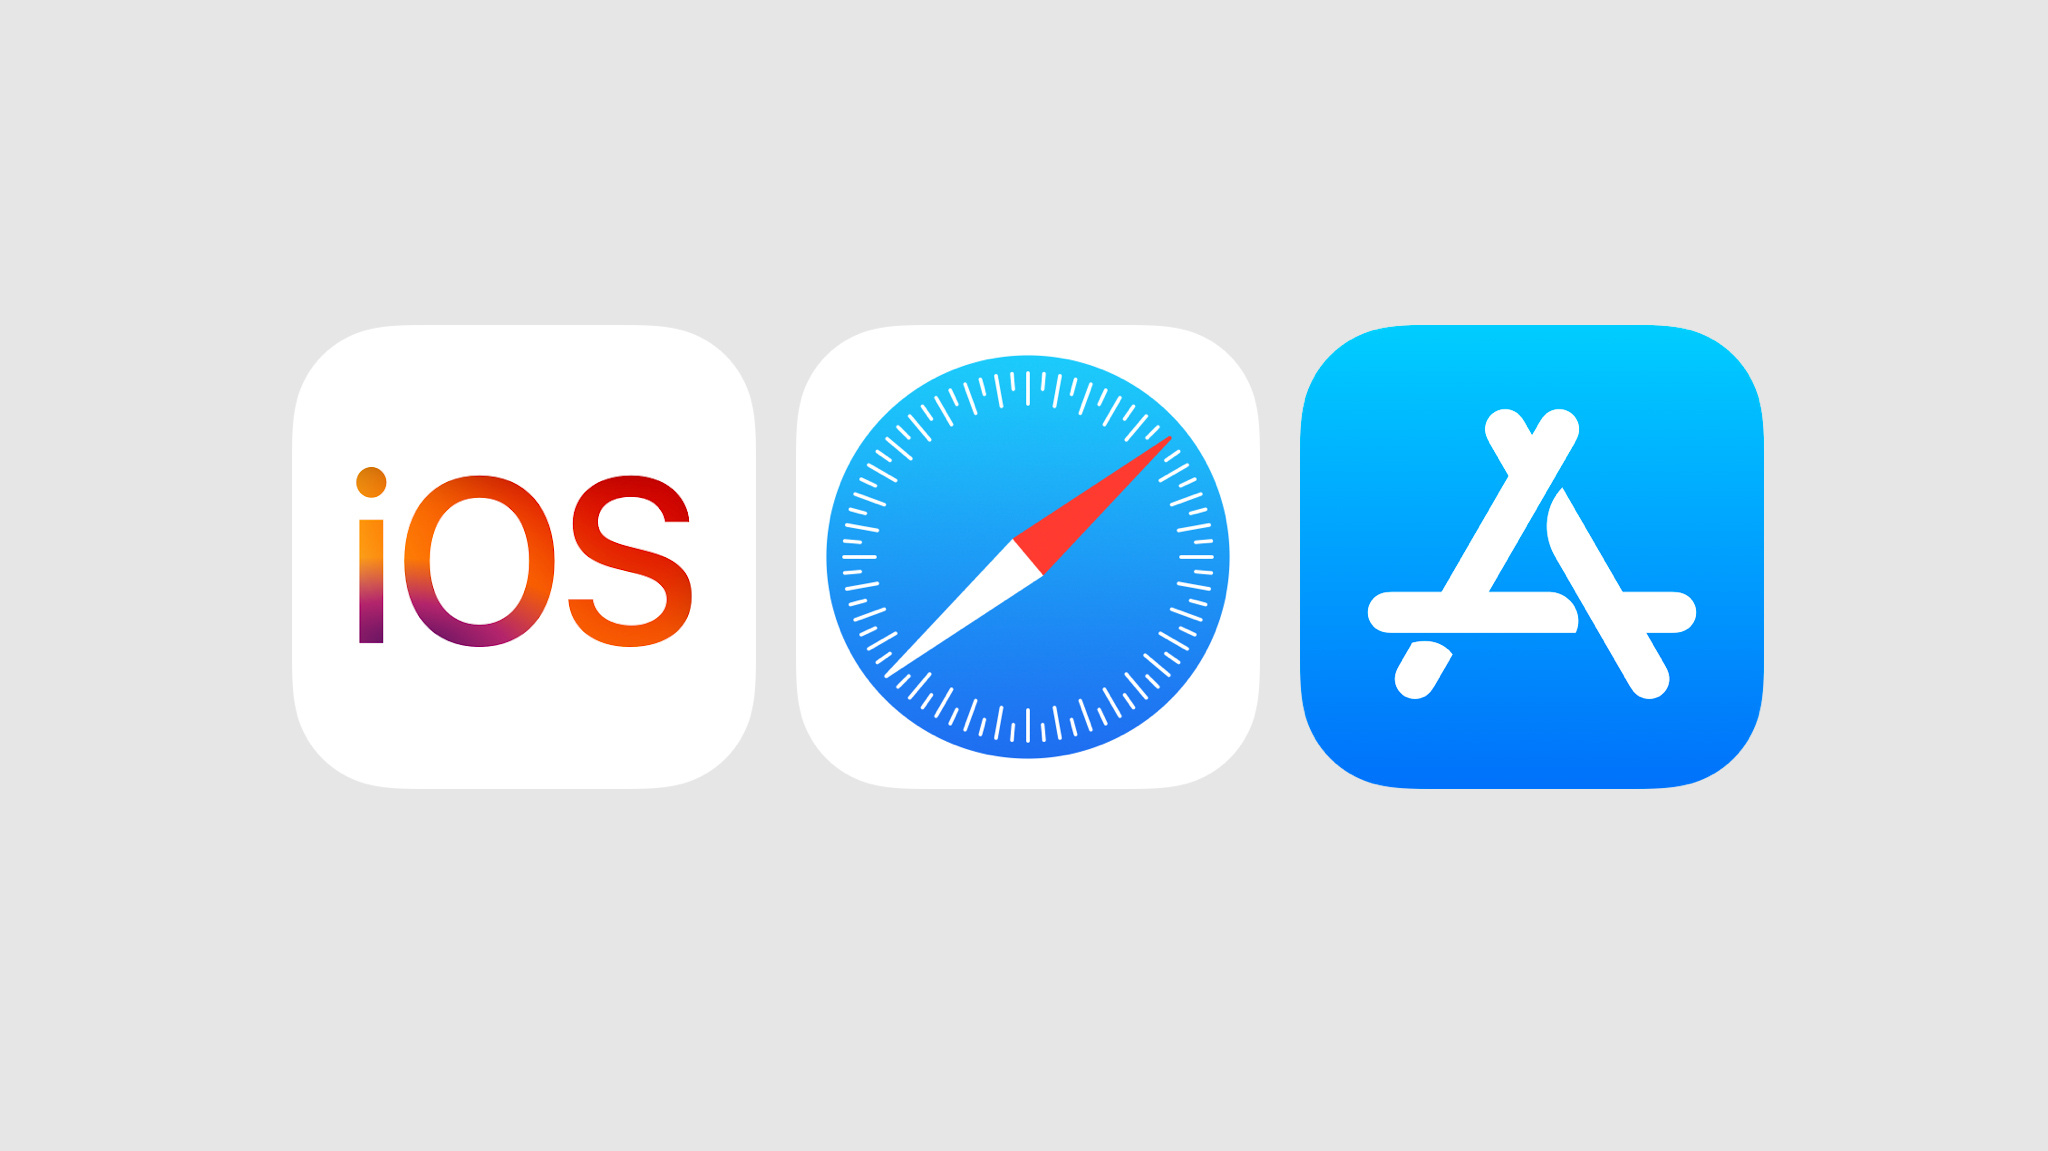 The iOS, Safari, and App Store icons against a light gray background.